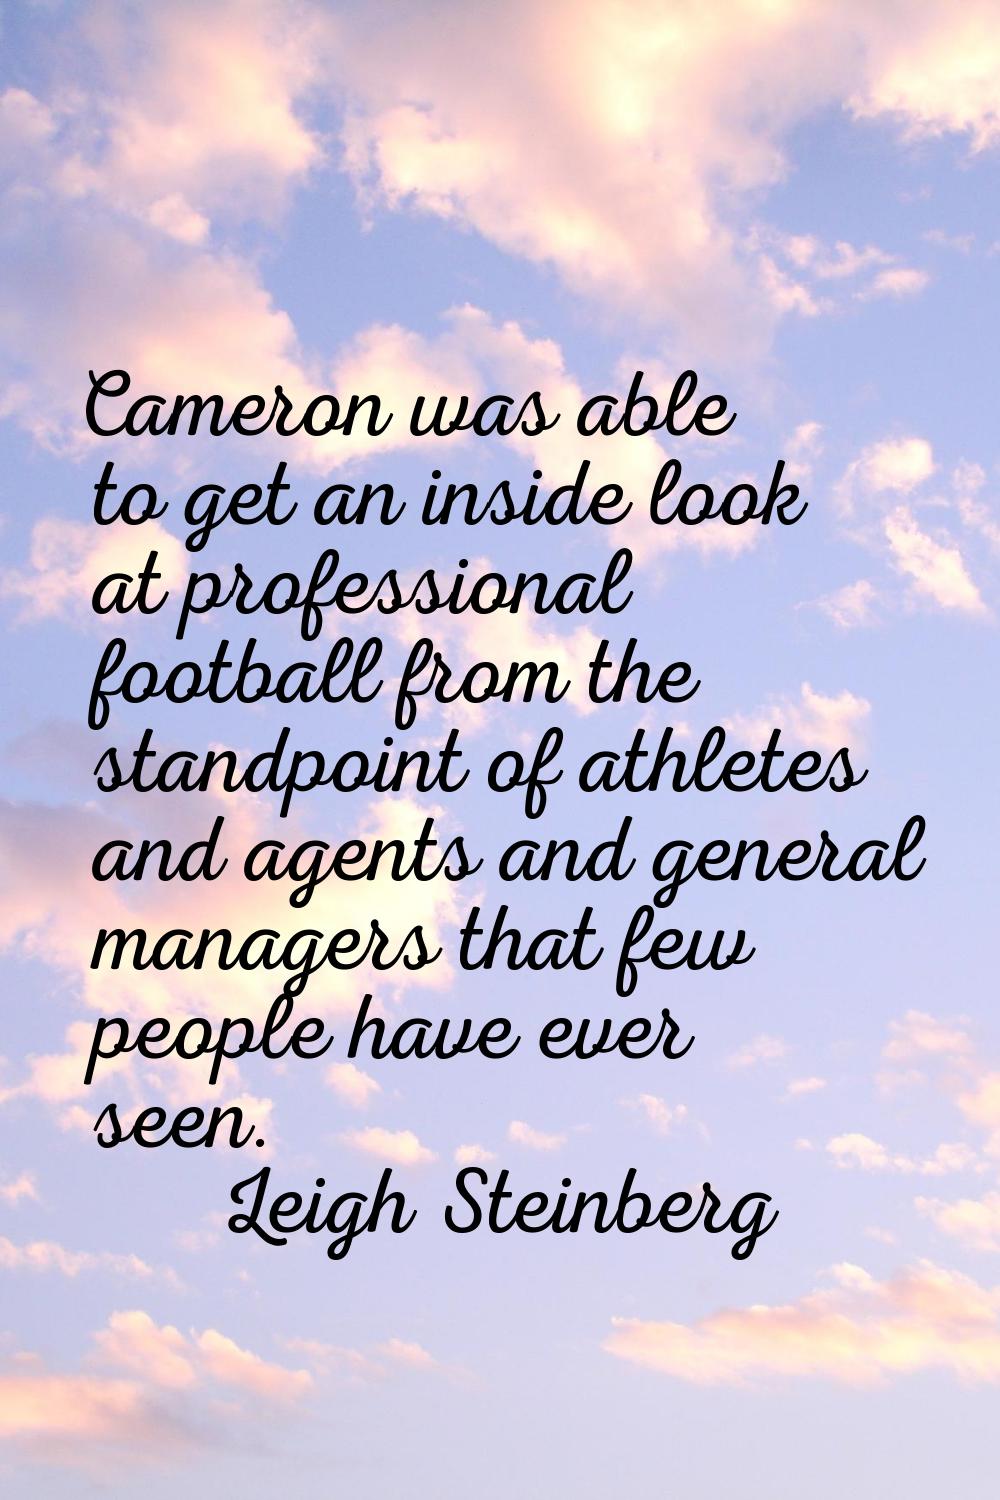 Cameron was able to get an inside look at professional football from the standpoint of athletes and